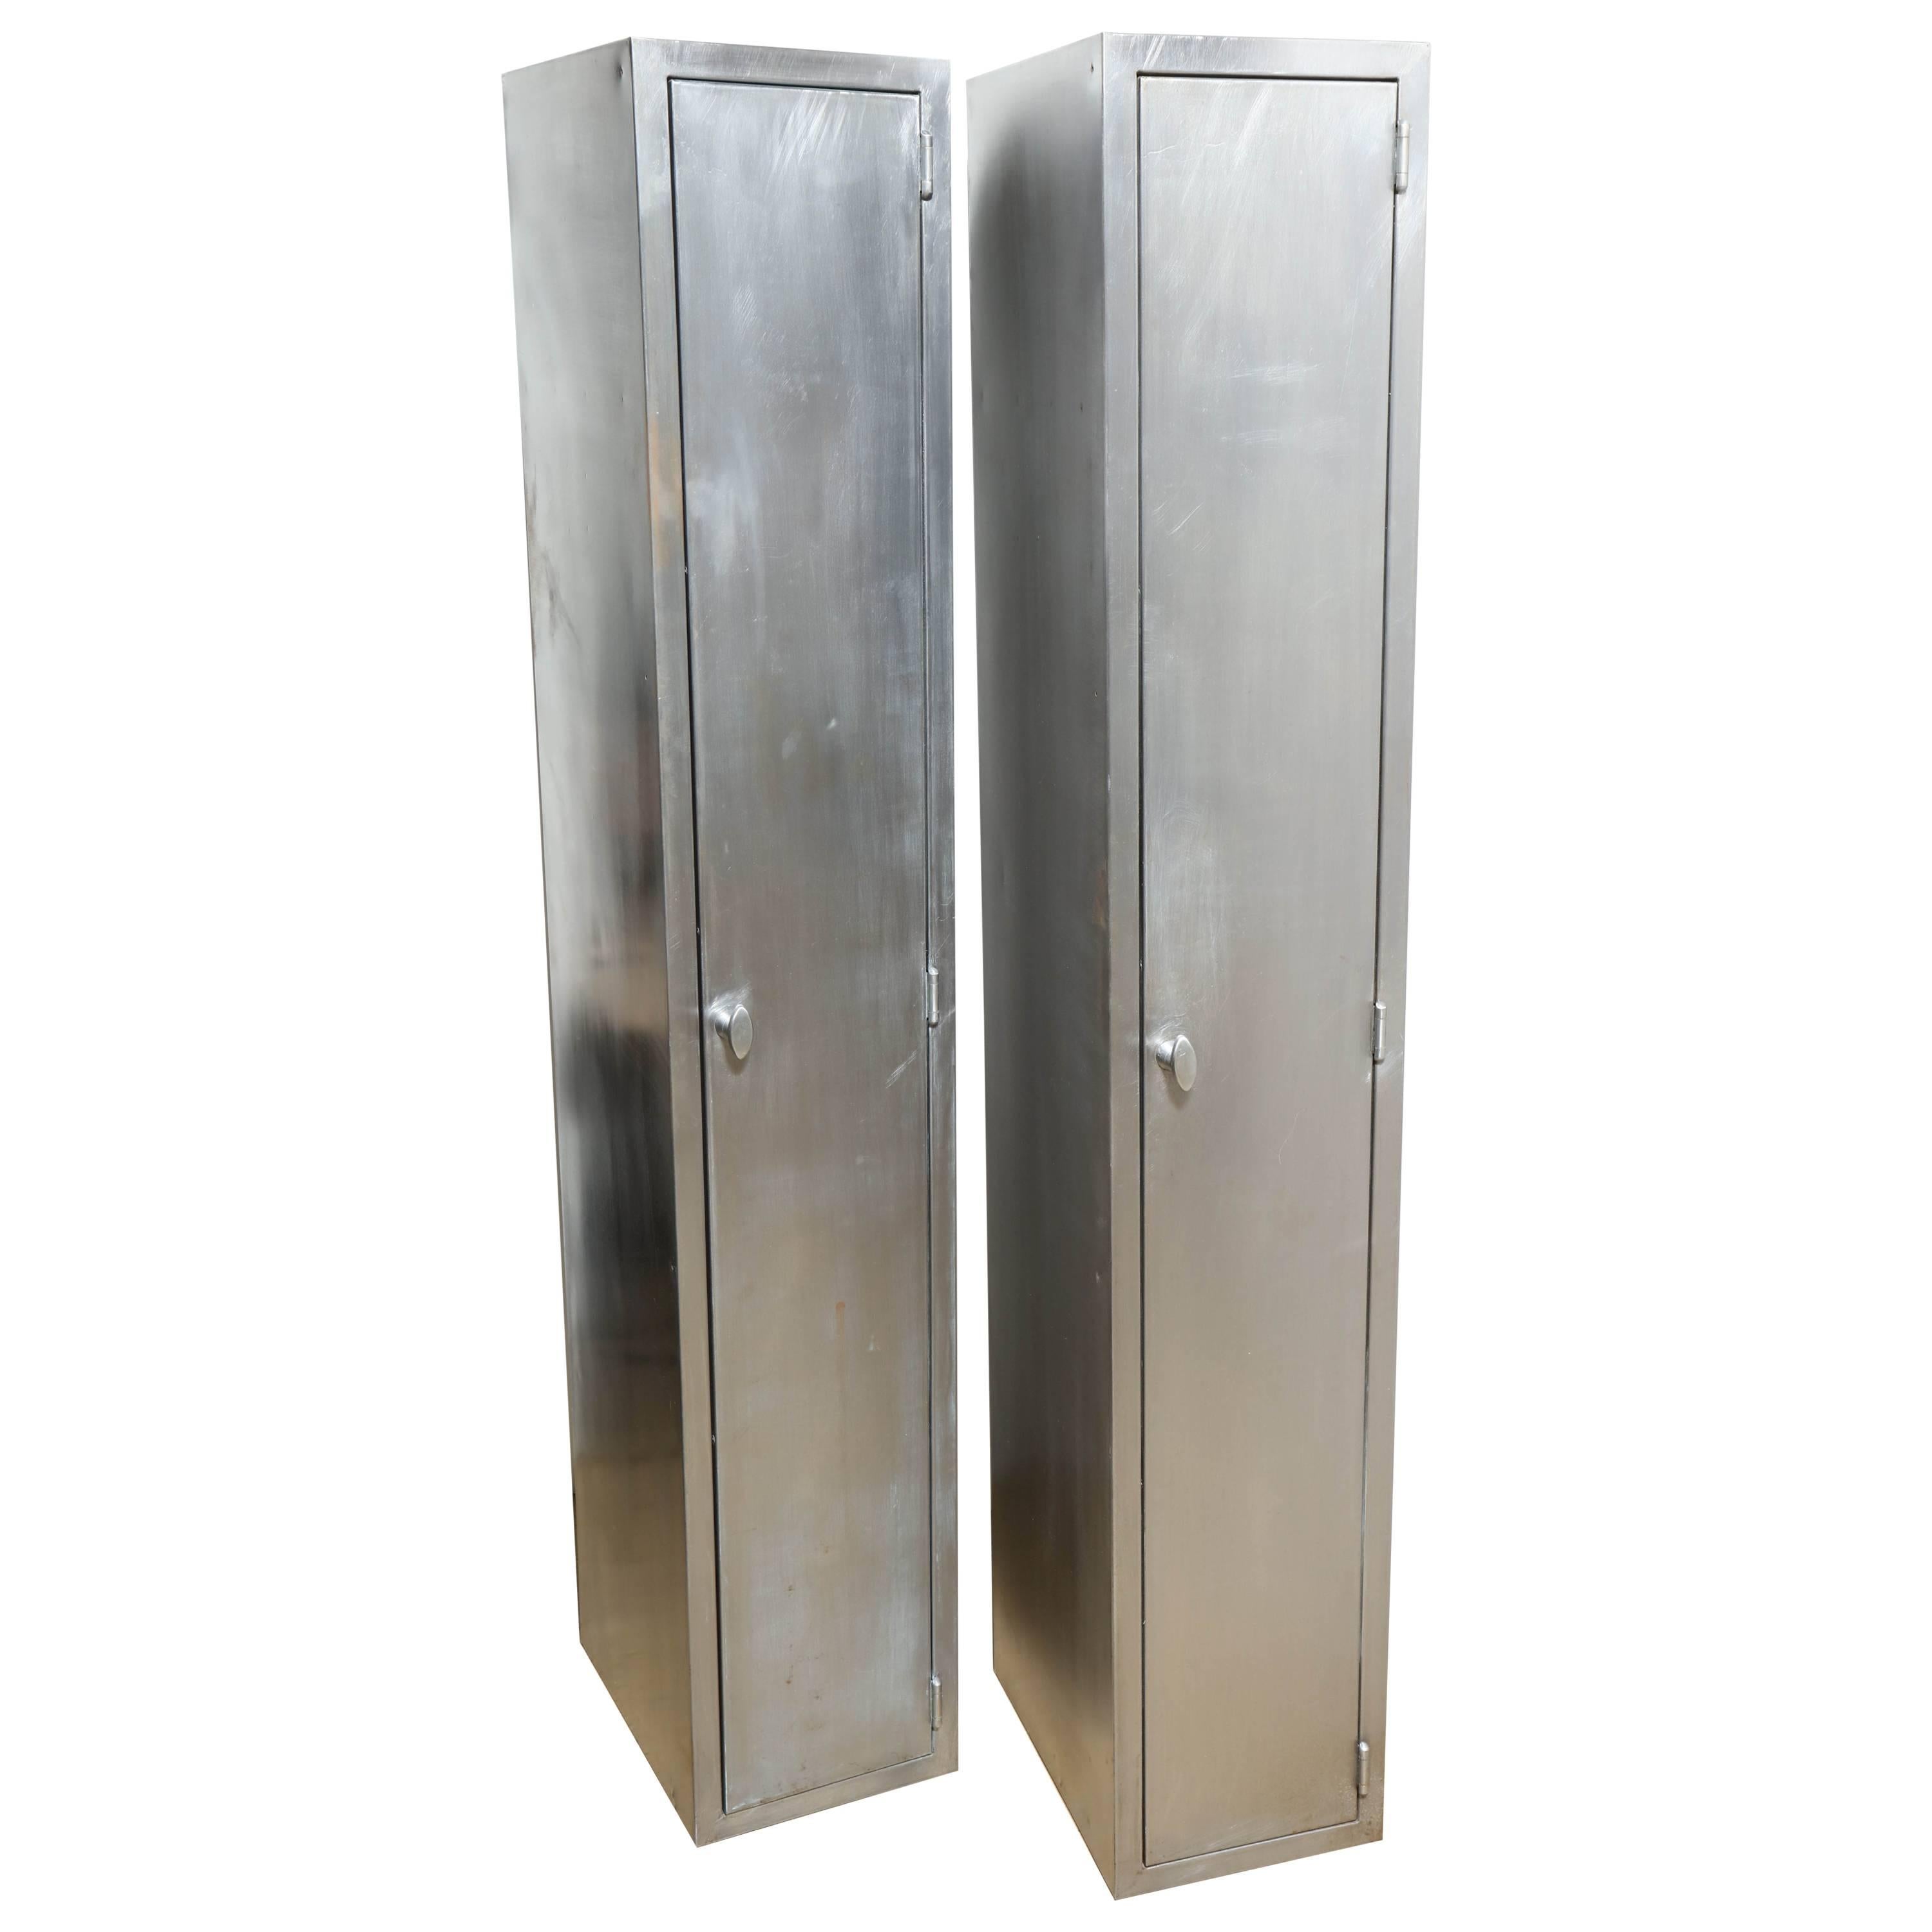 Two Tall & Narrow 1950s Industrial, Brushed Steel Armoires 